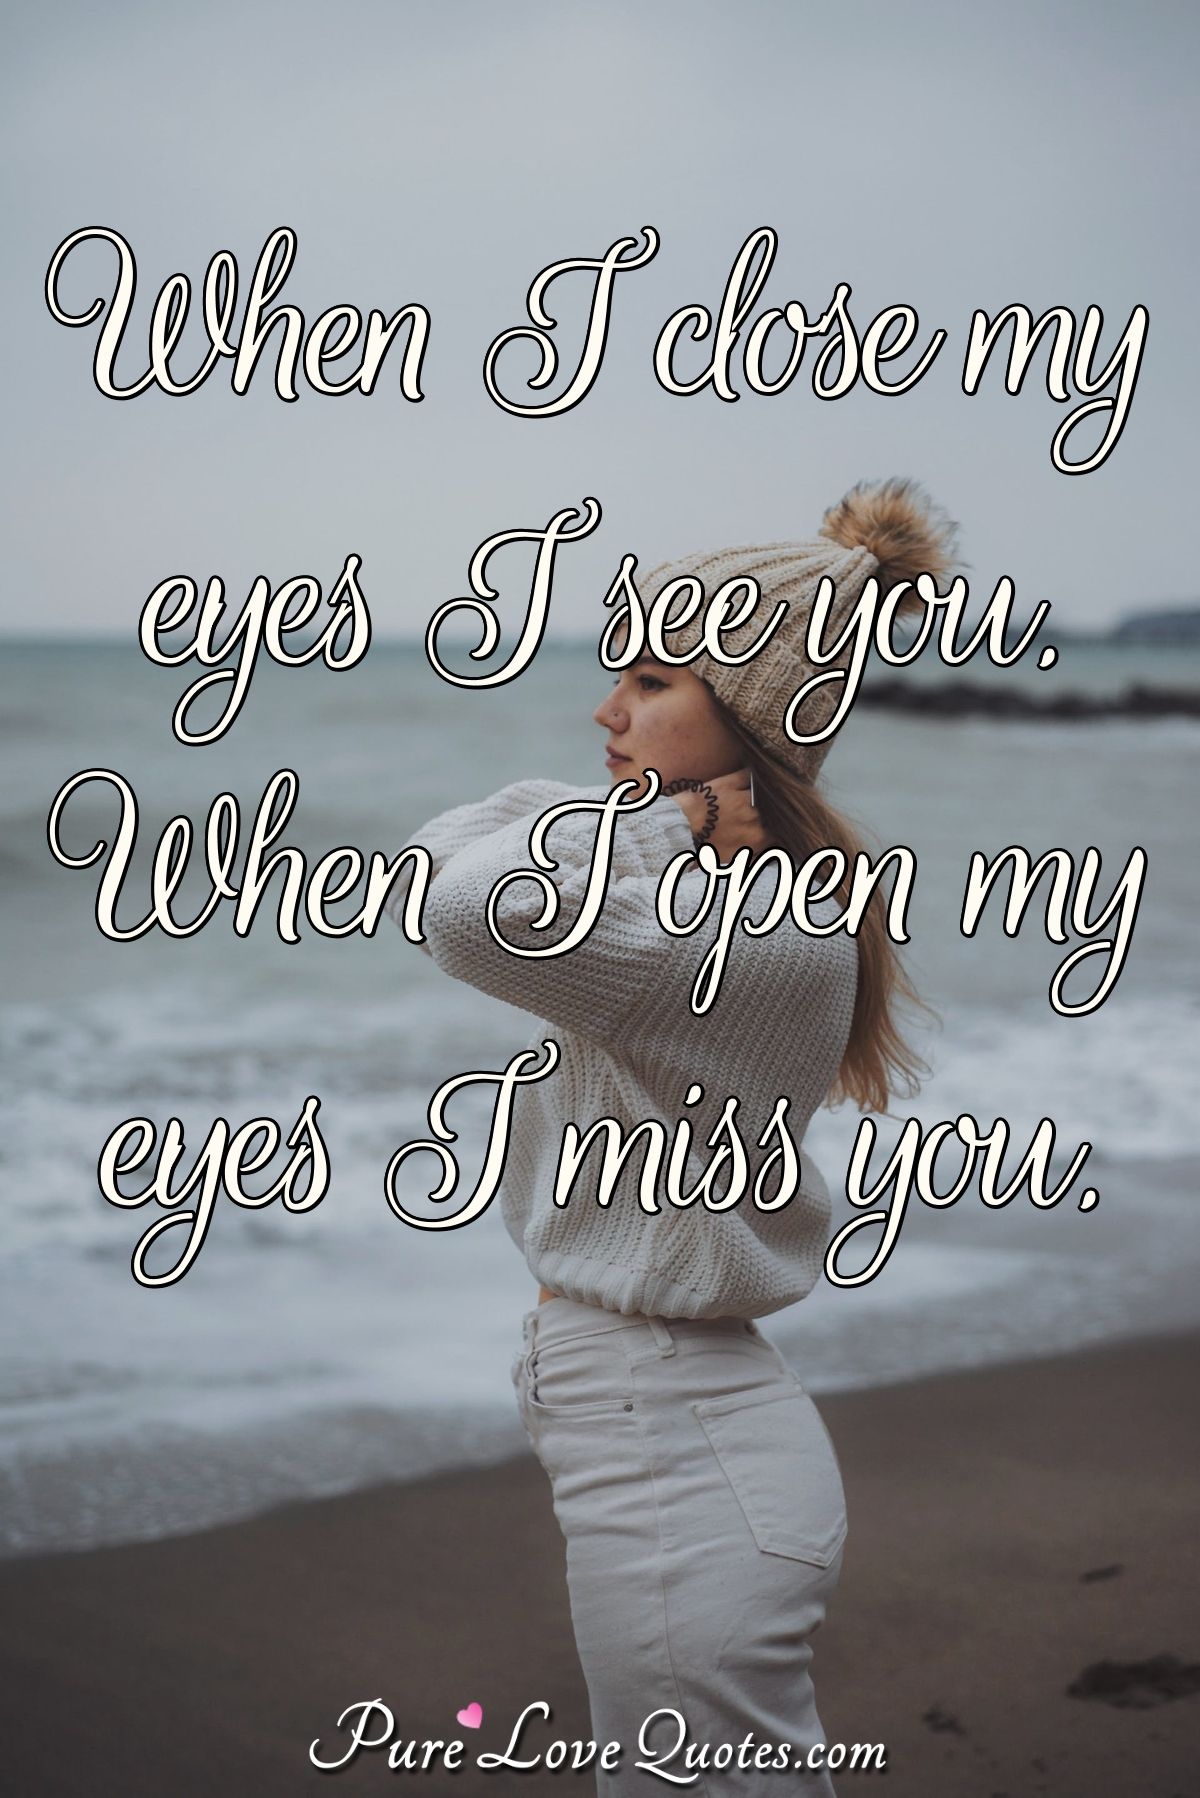 https://www.purelovequotes.com/images/quotes/1200/when-i-close-my-eyes-i-see.jpg